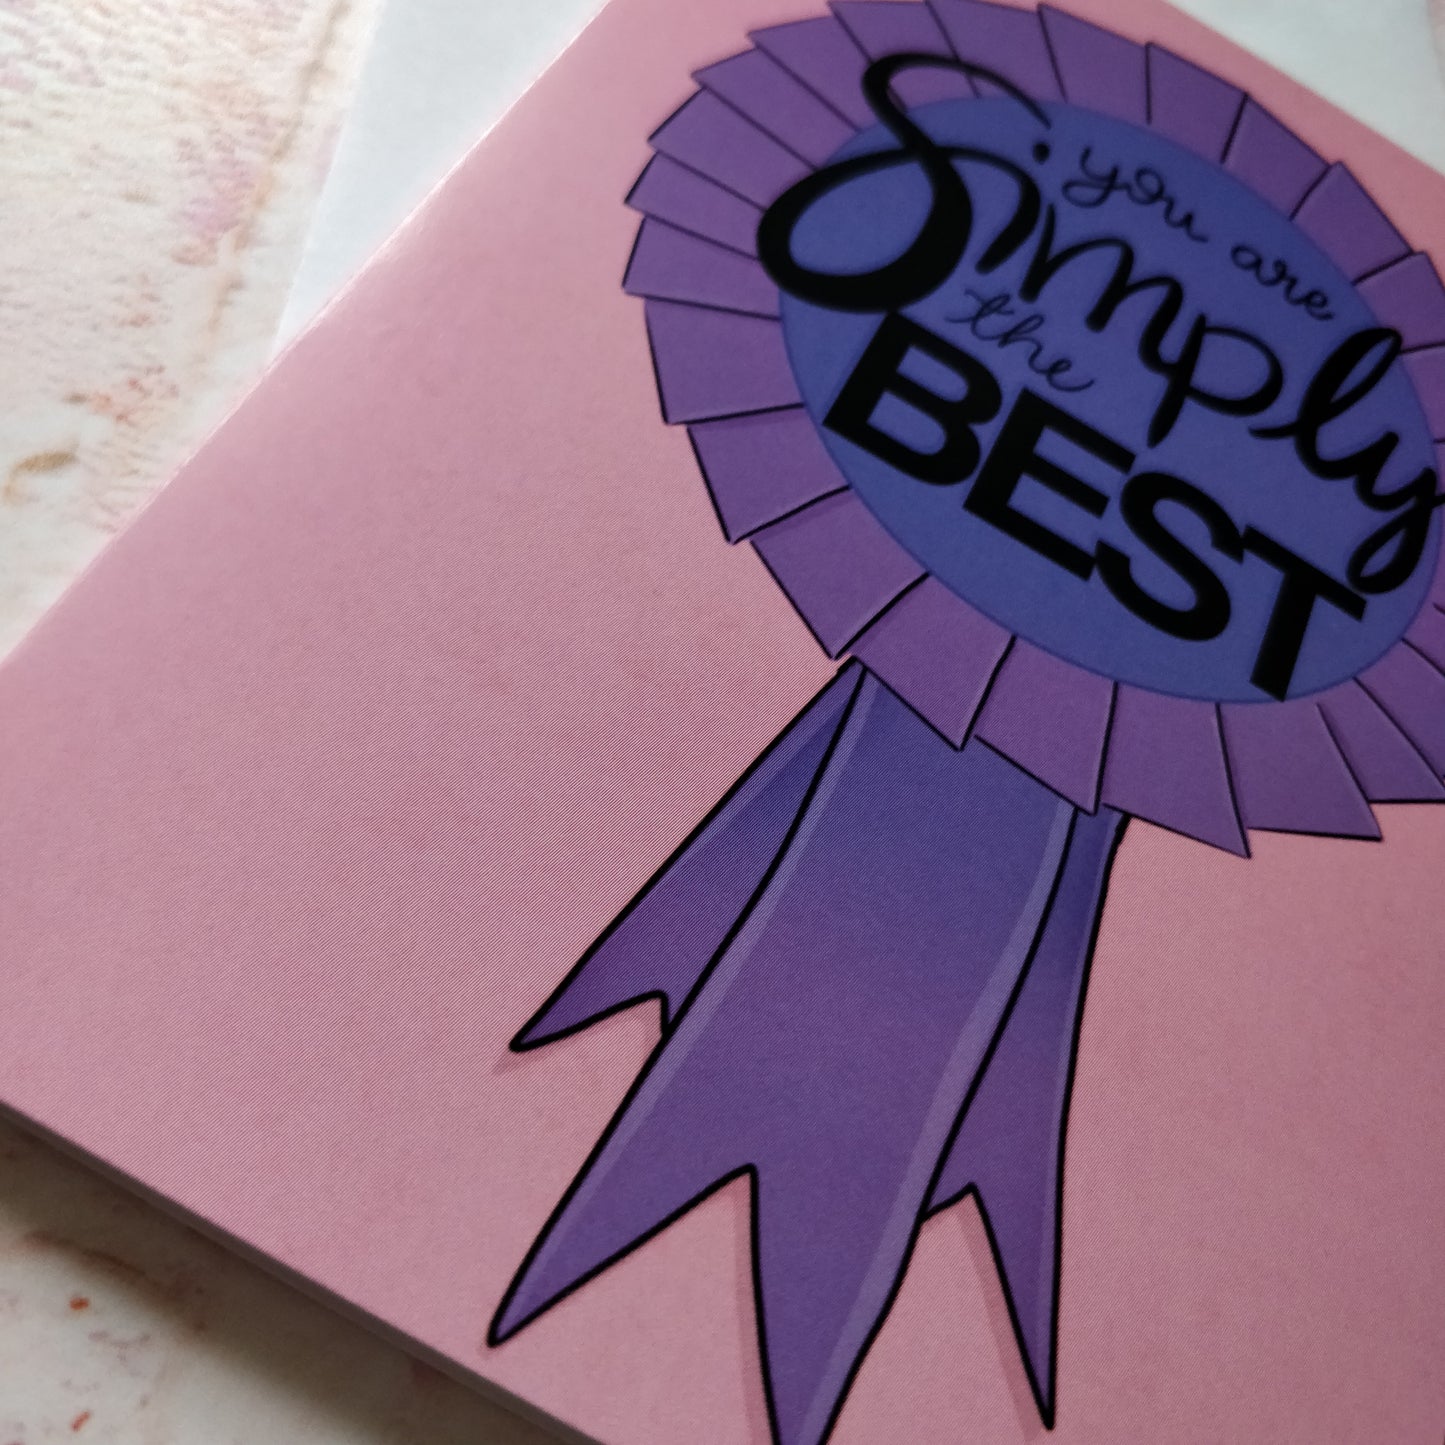 You're Simply the Best Greeting Card - Fay Dixon Design